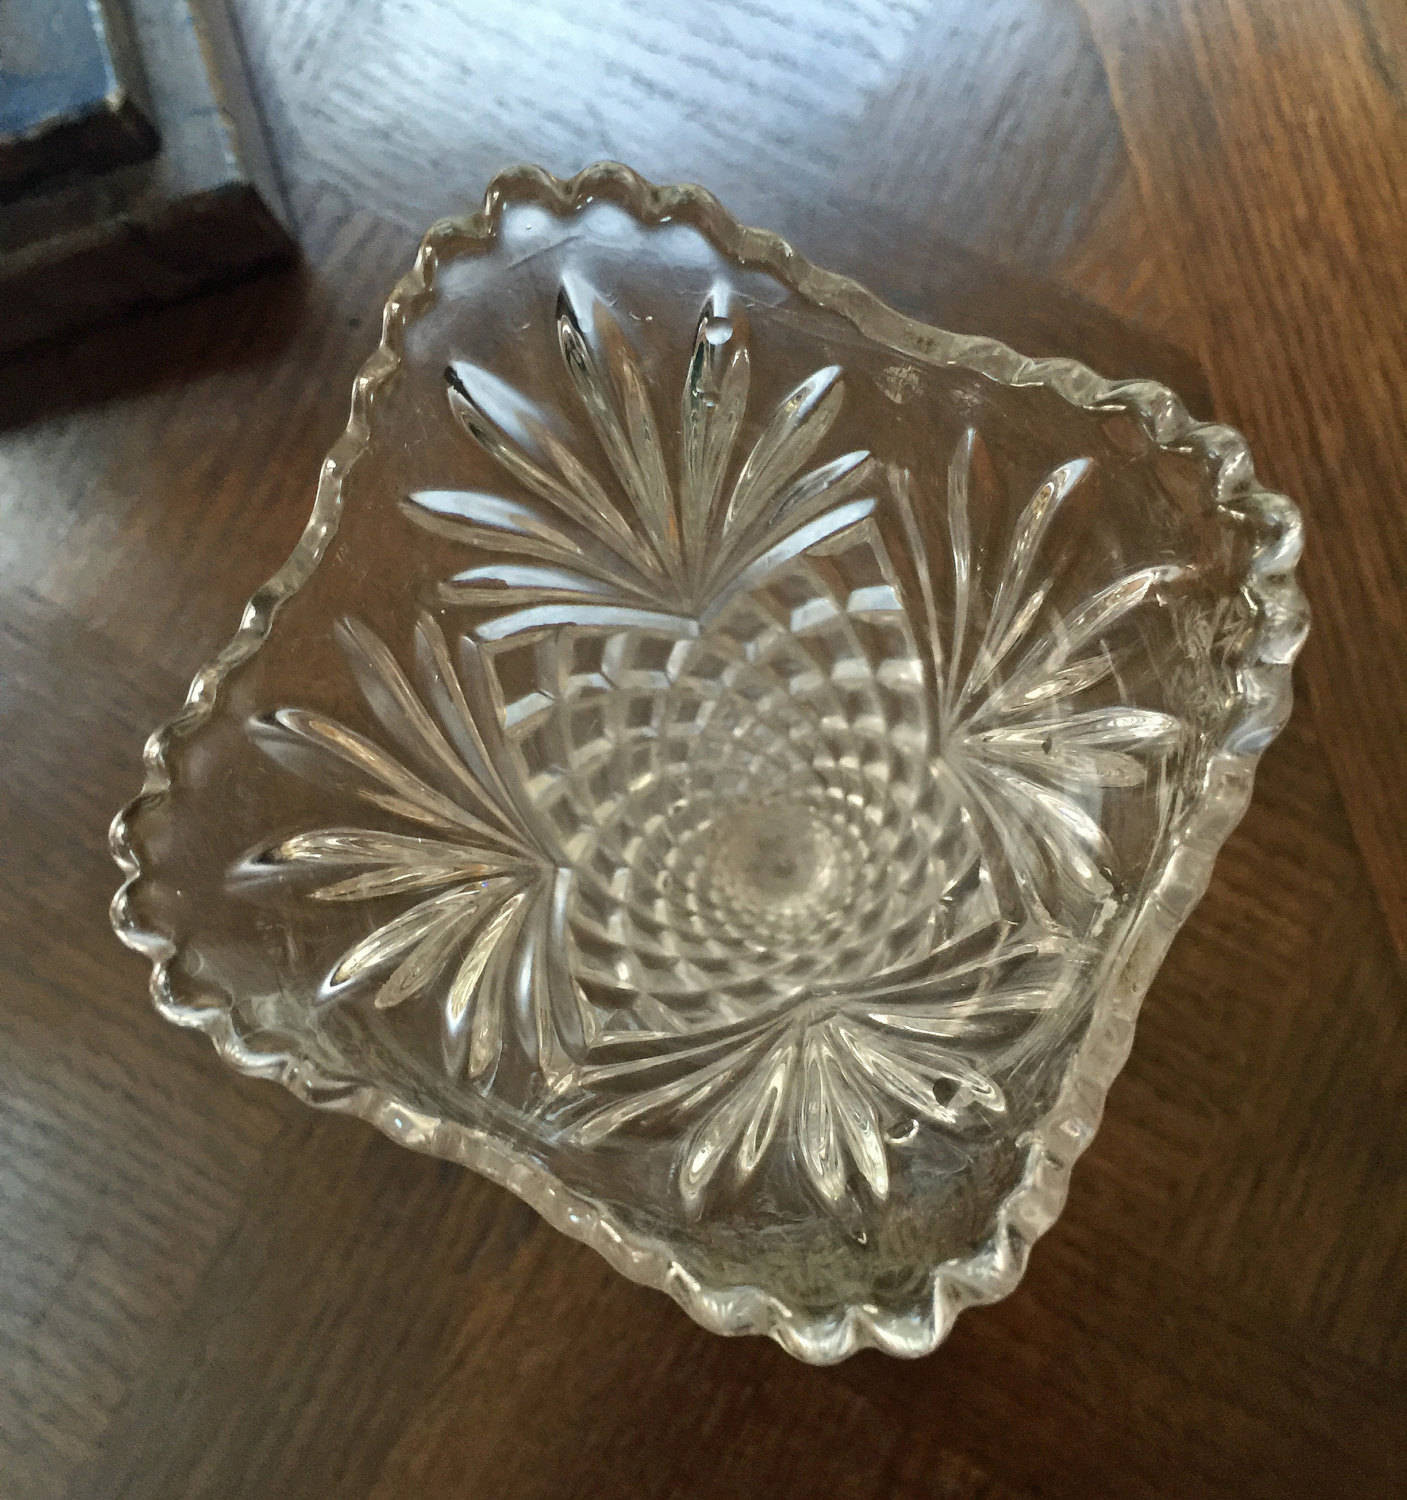 30 attractive Waterford Crystal Pineapple Vase 2024 free download waterford crystal pineapple vase of antique pressed glass vase eapg diamond and fan pattern etsy throughout dc29fc294c28ezoom